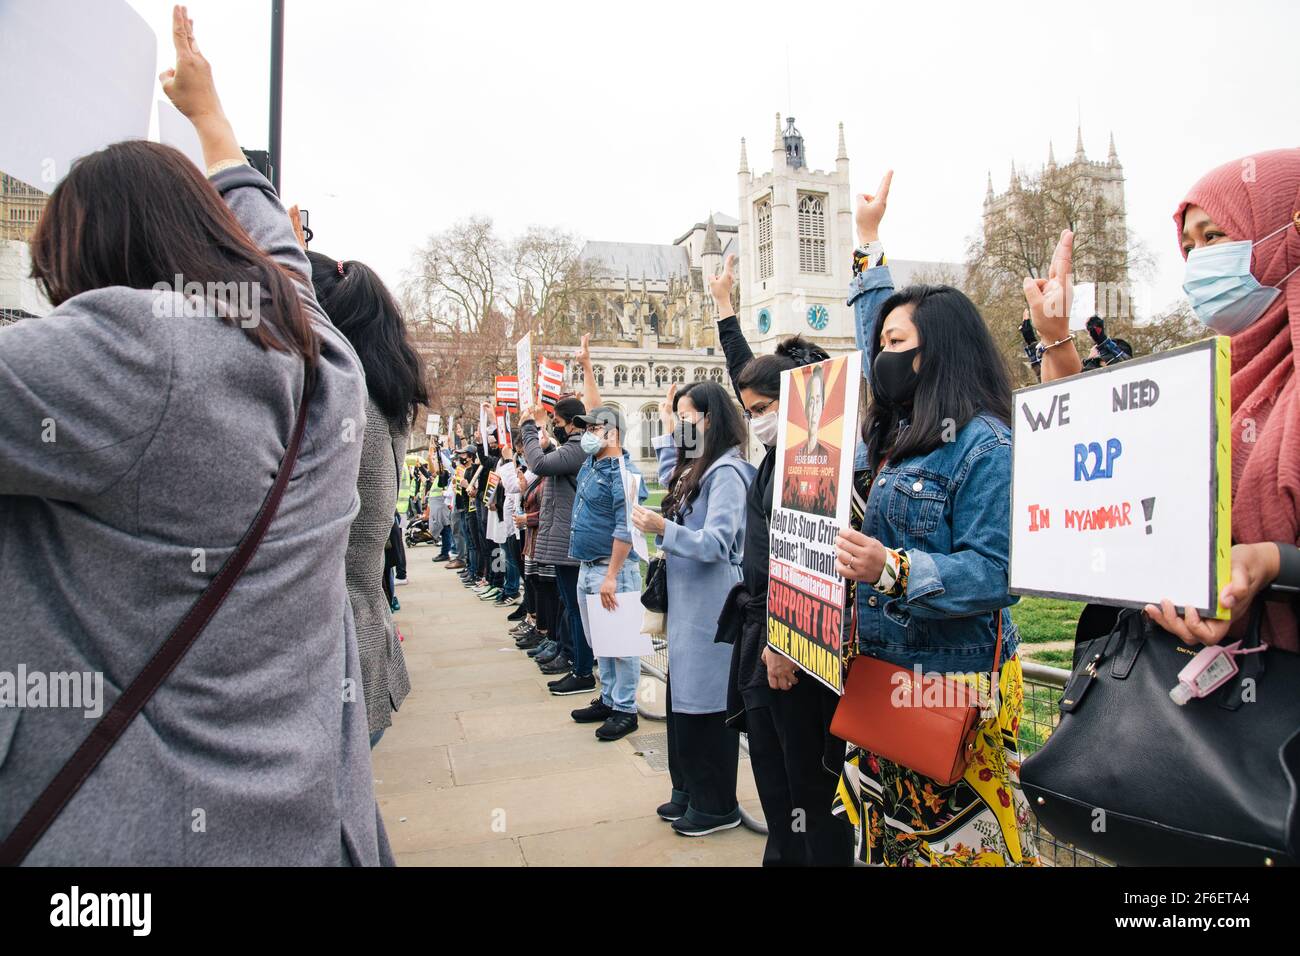 London, UK. 31st Mar 2021. Protest against military violence in Myanmar. Protestors gather in Parliament Square and march to the Chinese Embassy to voice their displeasure at Chinese involvement in the military coup and murder of innocent civilians including children Stock Photo